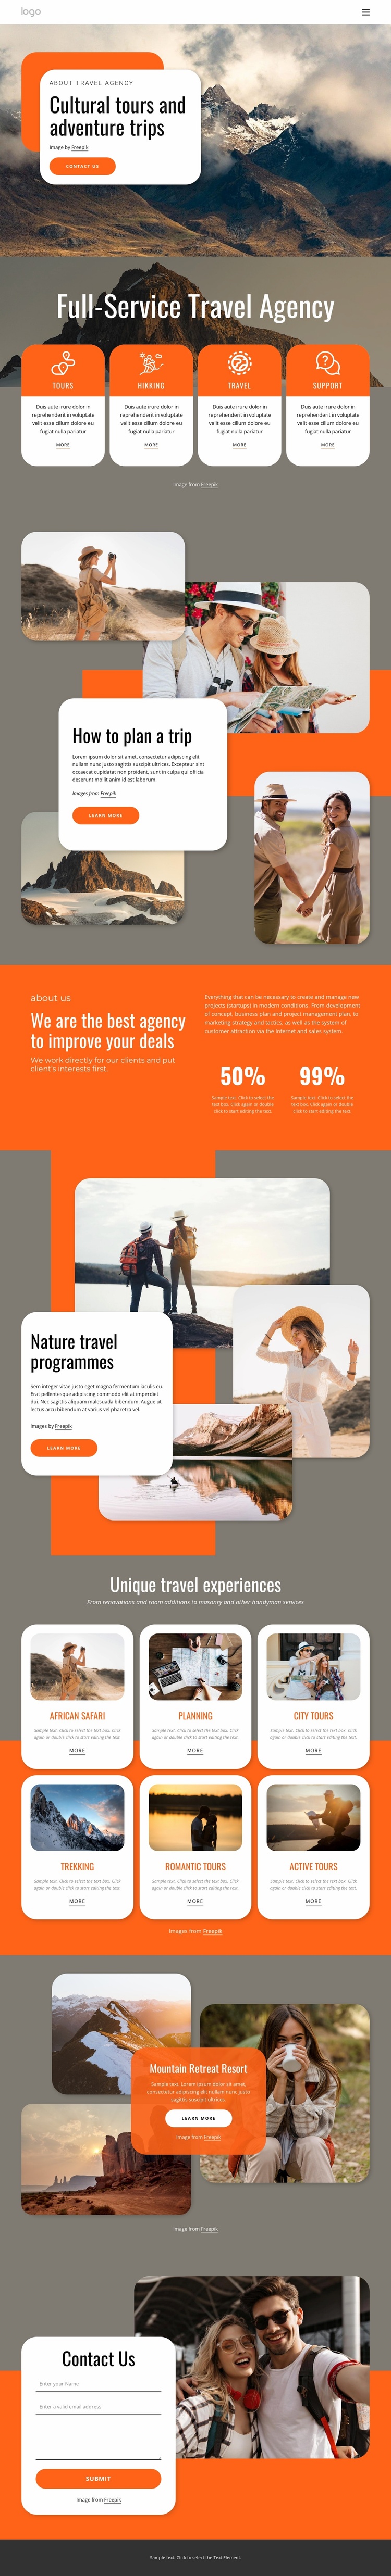 Group travel for all ages Website Template